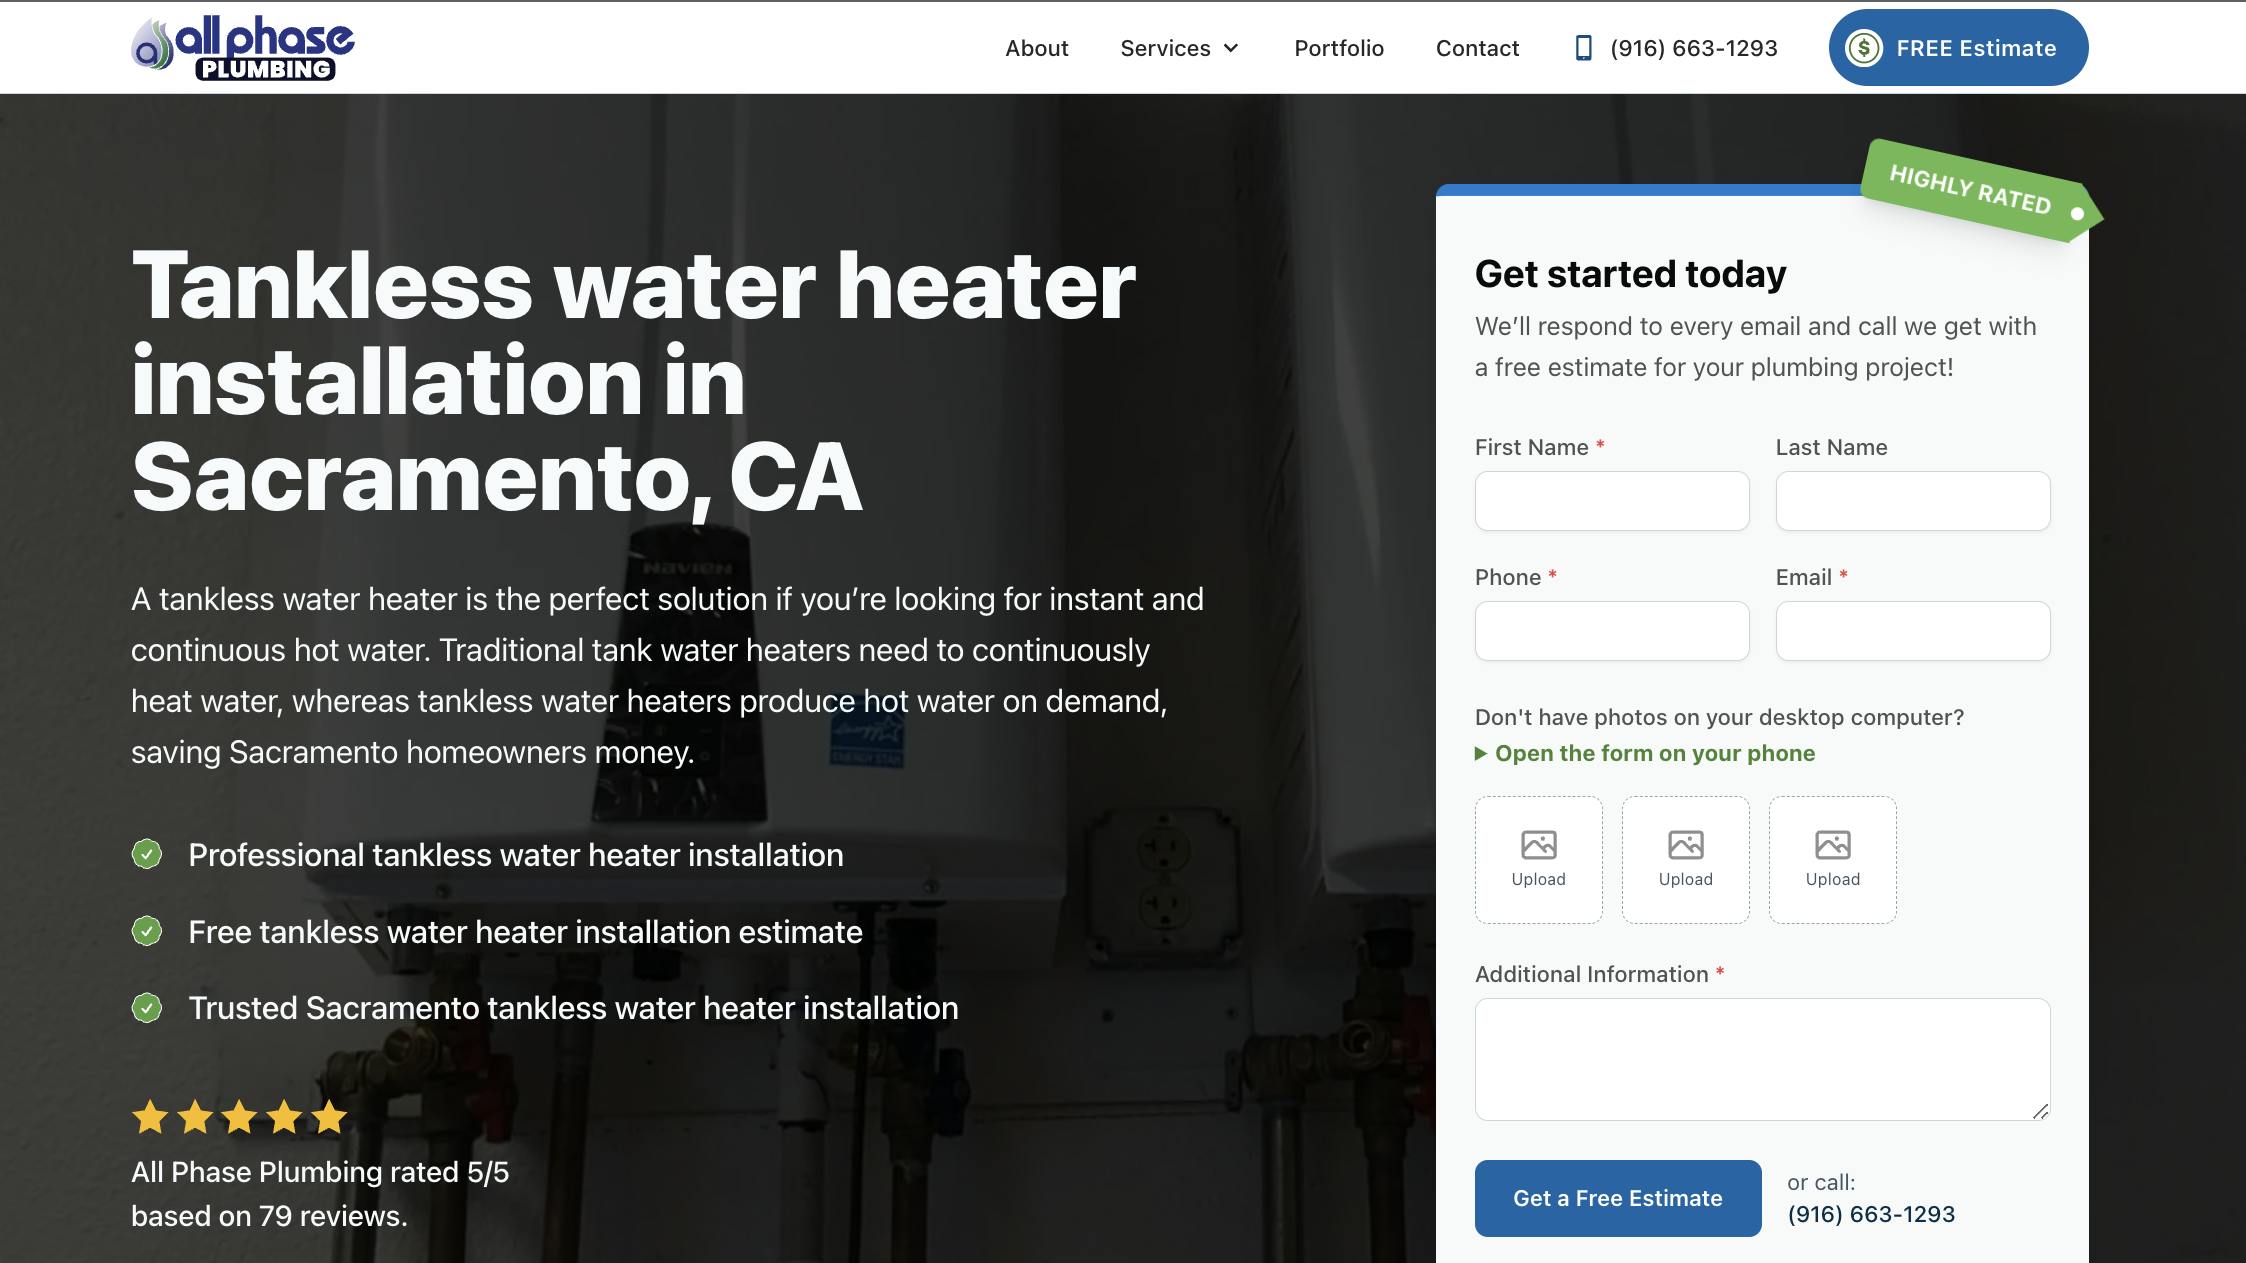 Webpage detailing tankless water heater installation services in Sacramento, CA, with a focus on instant and continuous hot water benefits. Features include professional installation, free estimates, and trusted service, alongside an image of a wall-mounted tankless water heater. A contact form offers easy submission for free estimates, with options to upload photos and a highly rated badge for the service provider.